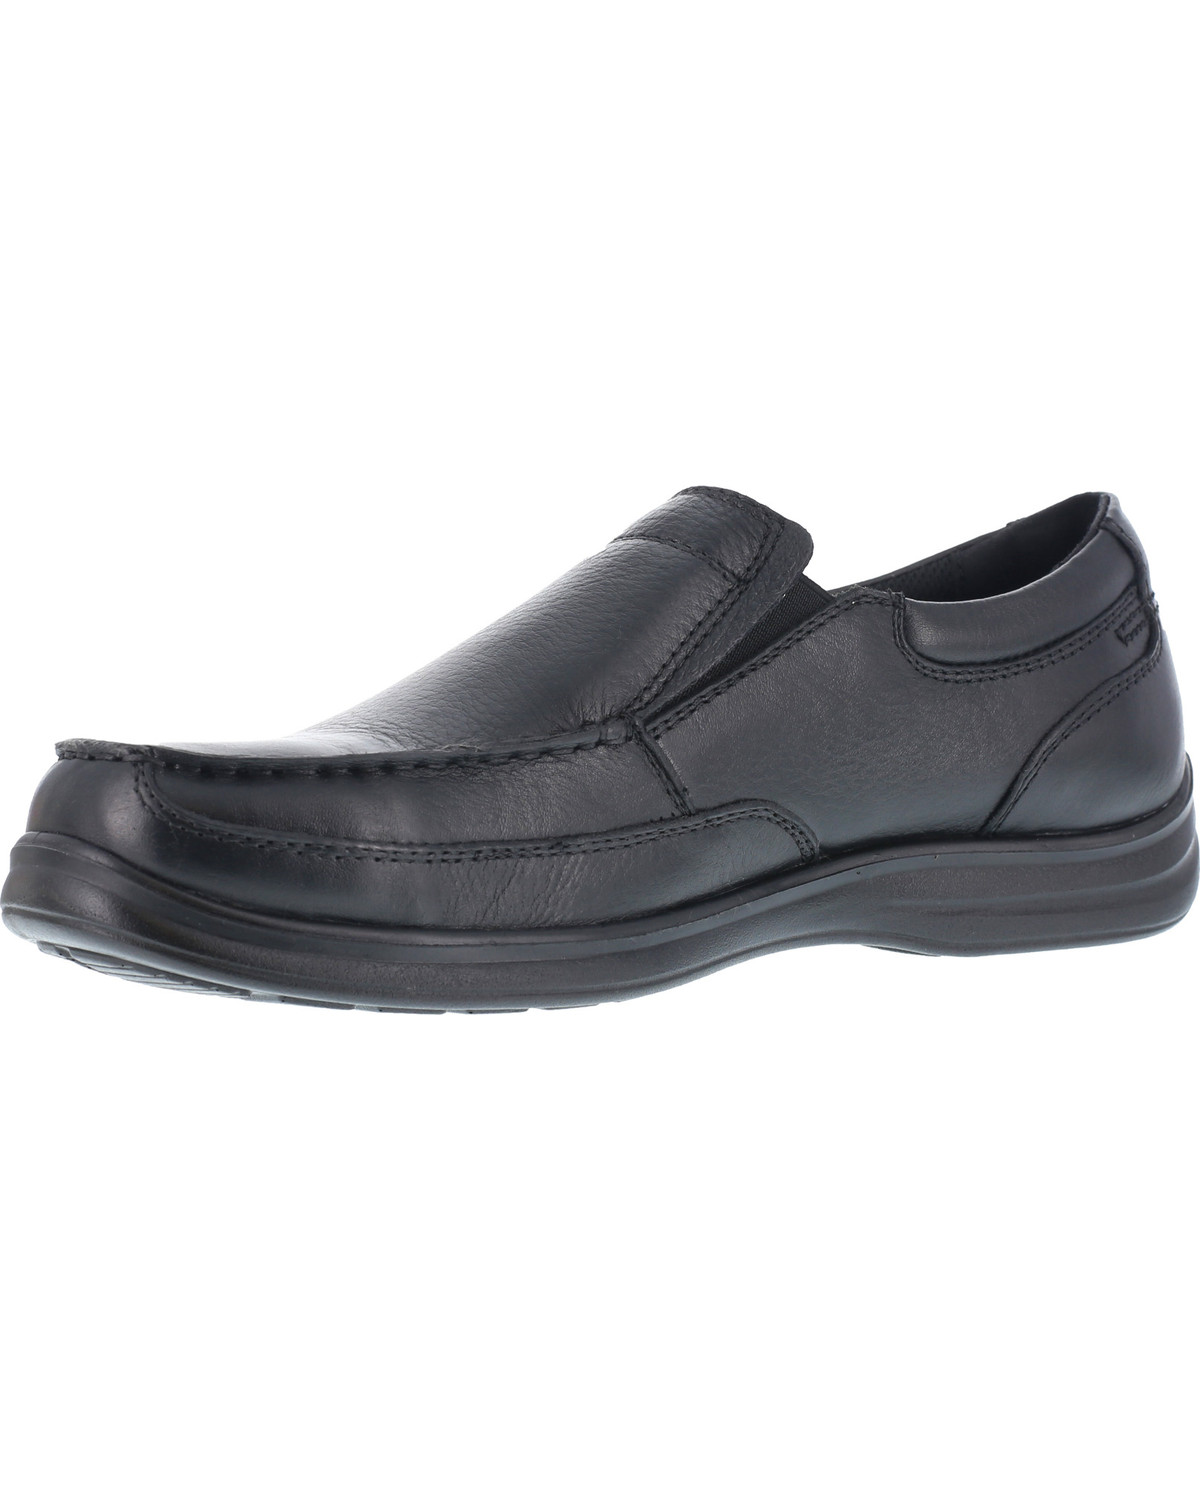 Florsheim Women's Slip-On Work Shoes - Steel Toe - Country Outfitter